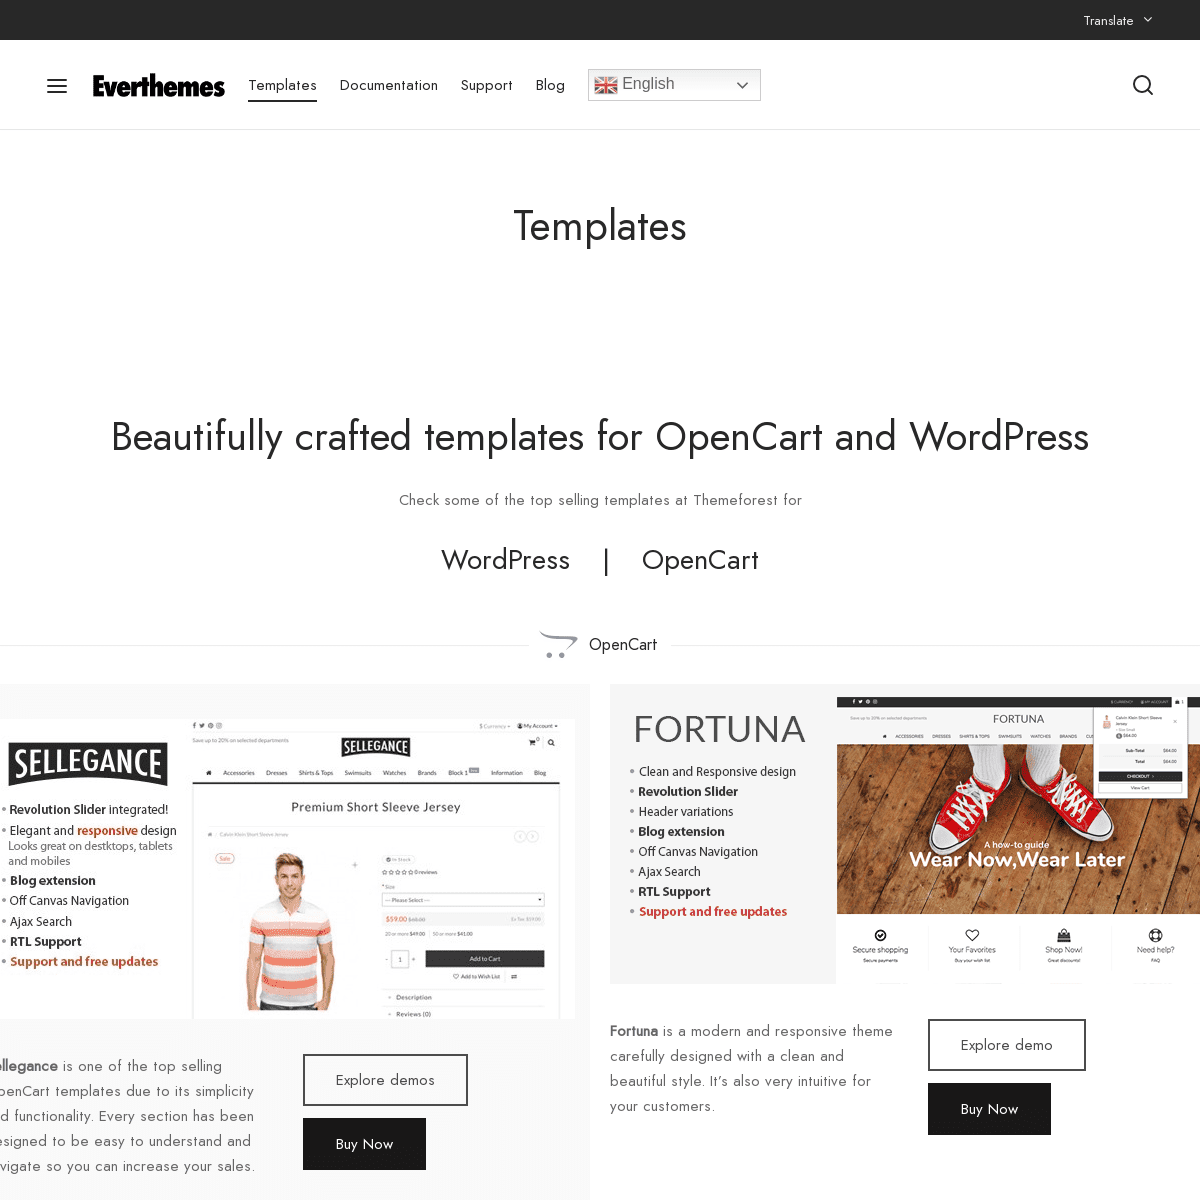 A complete backup of https://everthemes.com